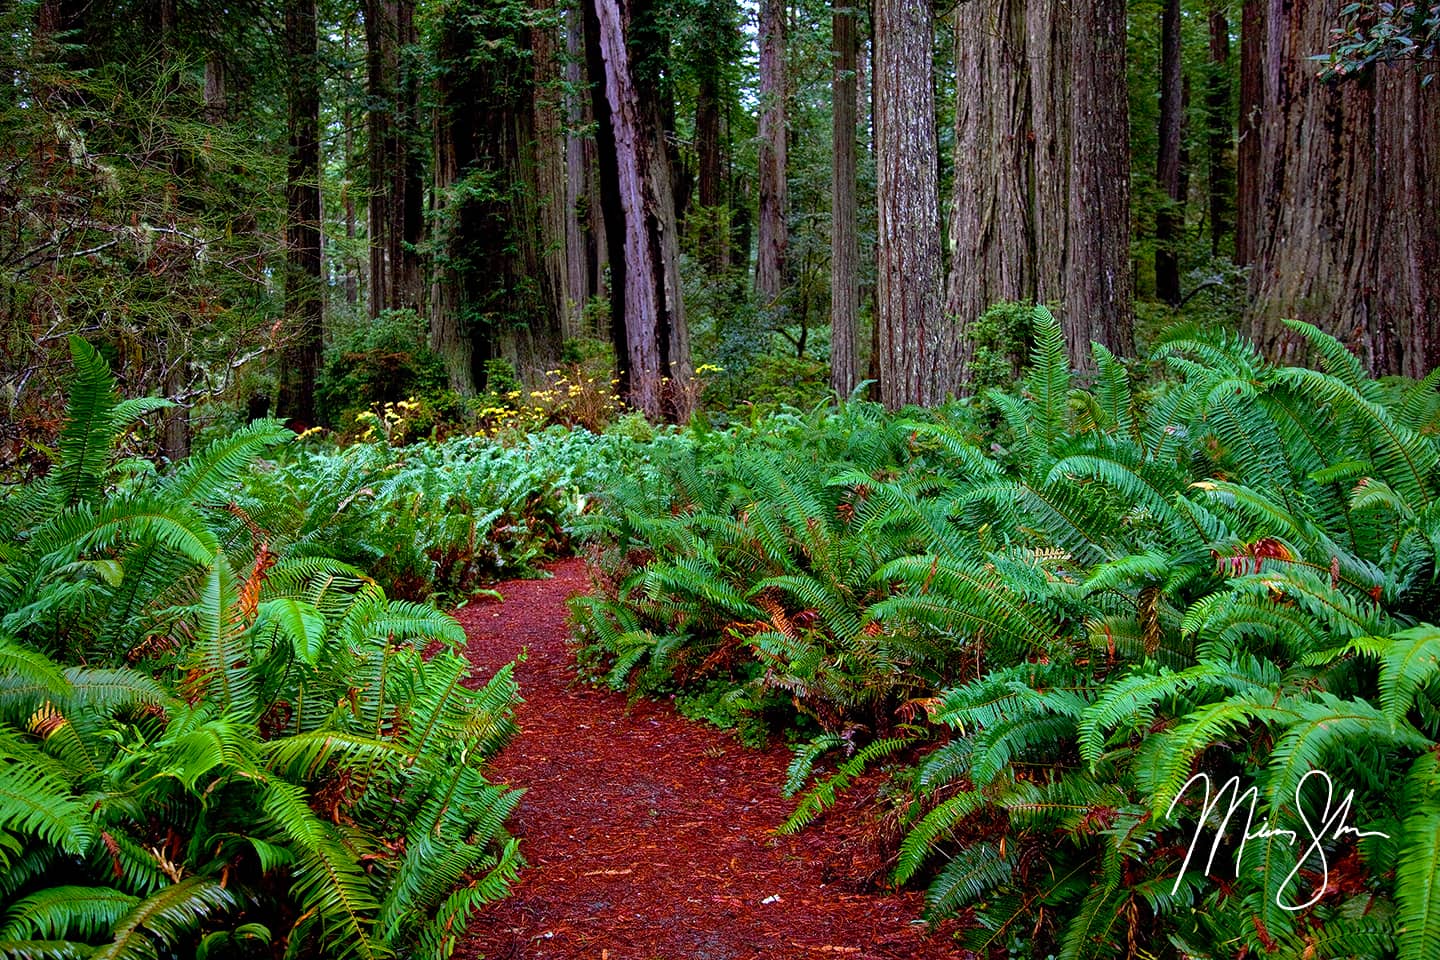 Trail Of The Redwoods - Redwood National Park, California